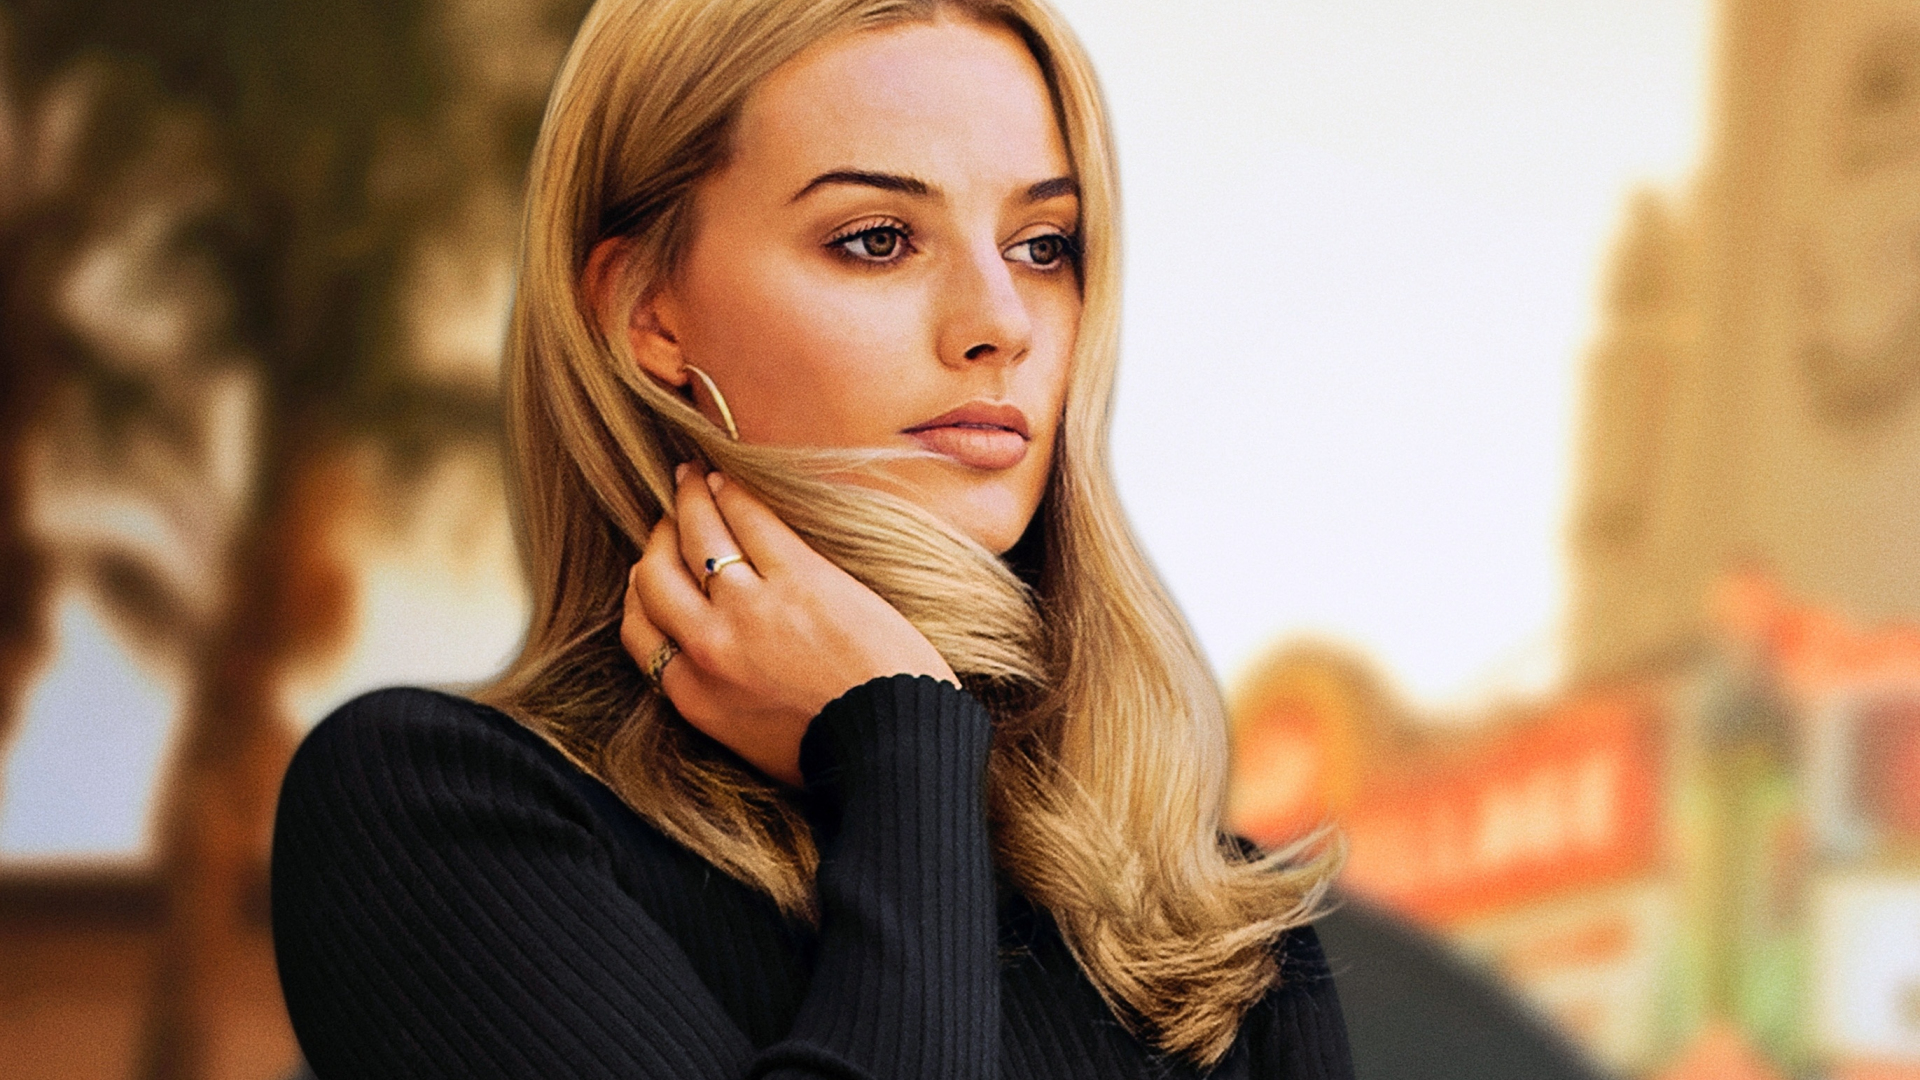 Download wallpaper 1920x1080 margot robbie, once upon a time in hollywood,  movie, actress, full hd, hdtv, fhd, 1080p wallpaper, 1920x1080 hd  background, 20879